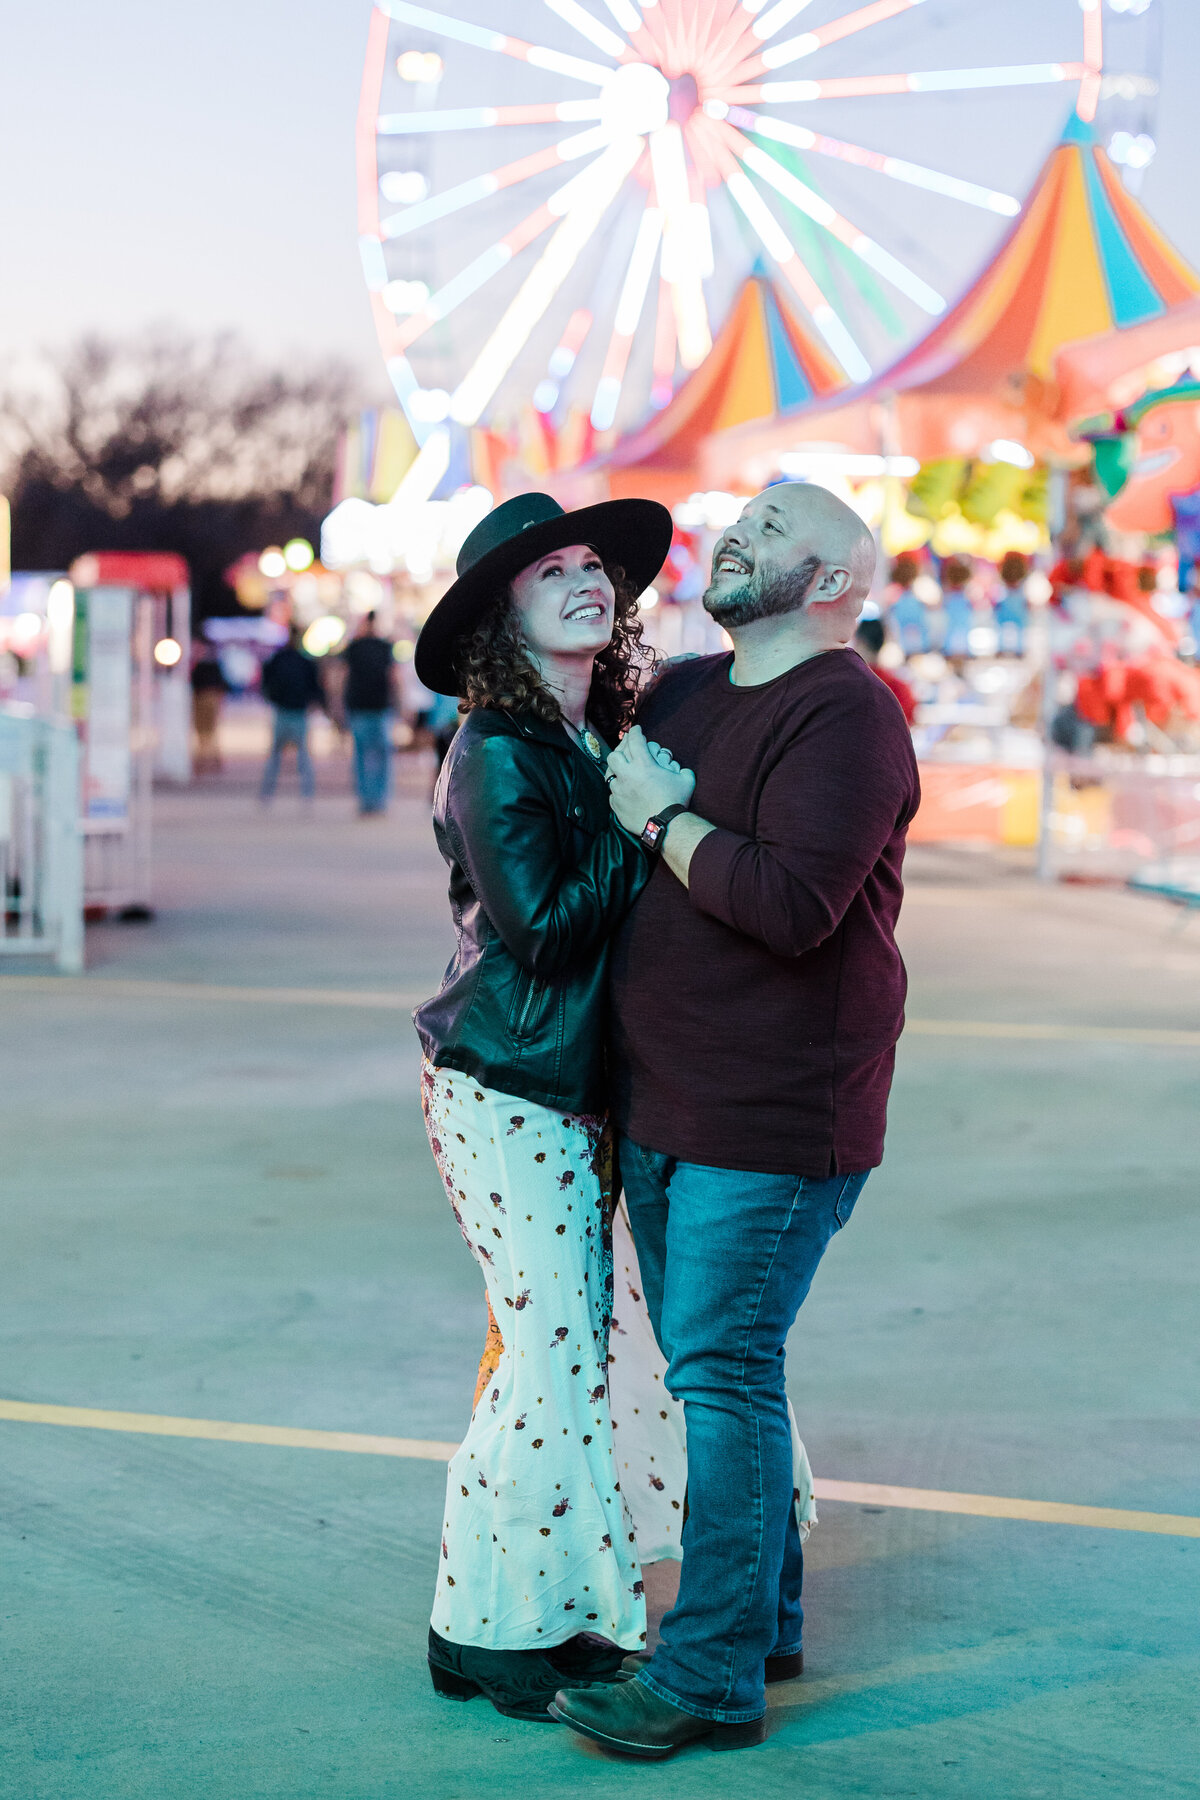 A couple dancing and smiling together at a carnival during their engagement photoshoot in DFW, Texas. The woman on the left is wearing a black brimmed hat, a black leather jacket, and a detailed, long white skirt. The man on the right is wearing a maroon sweater and jeans. A colorful, lively carnival setting can be seen behind them including a large ferris wheel.